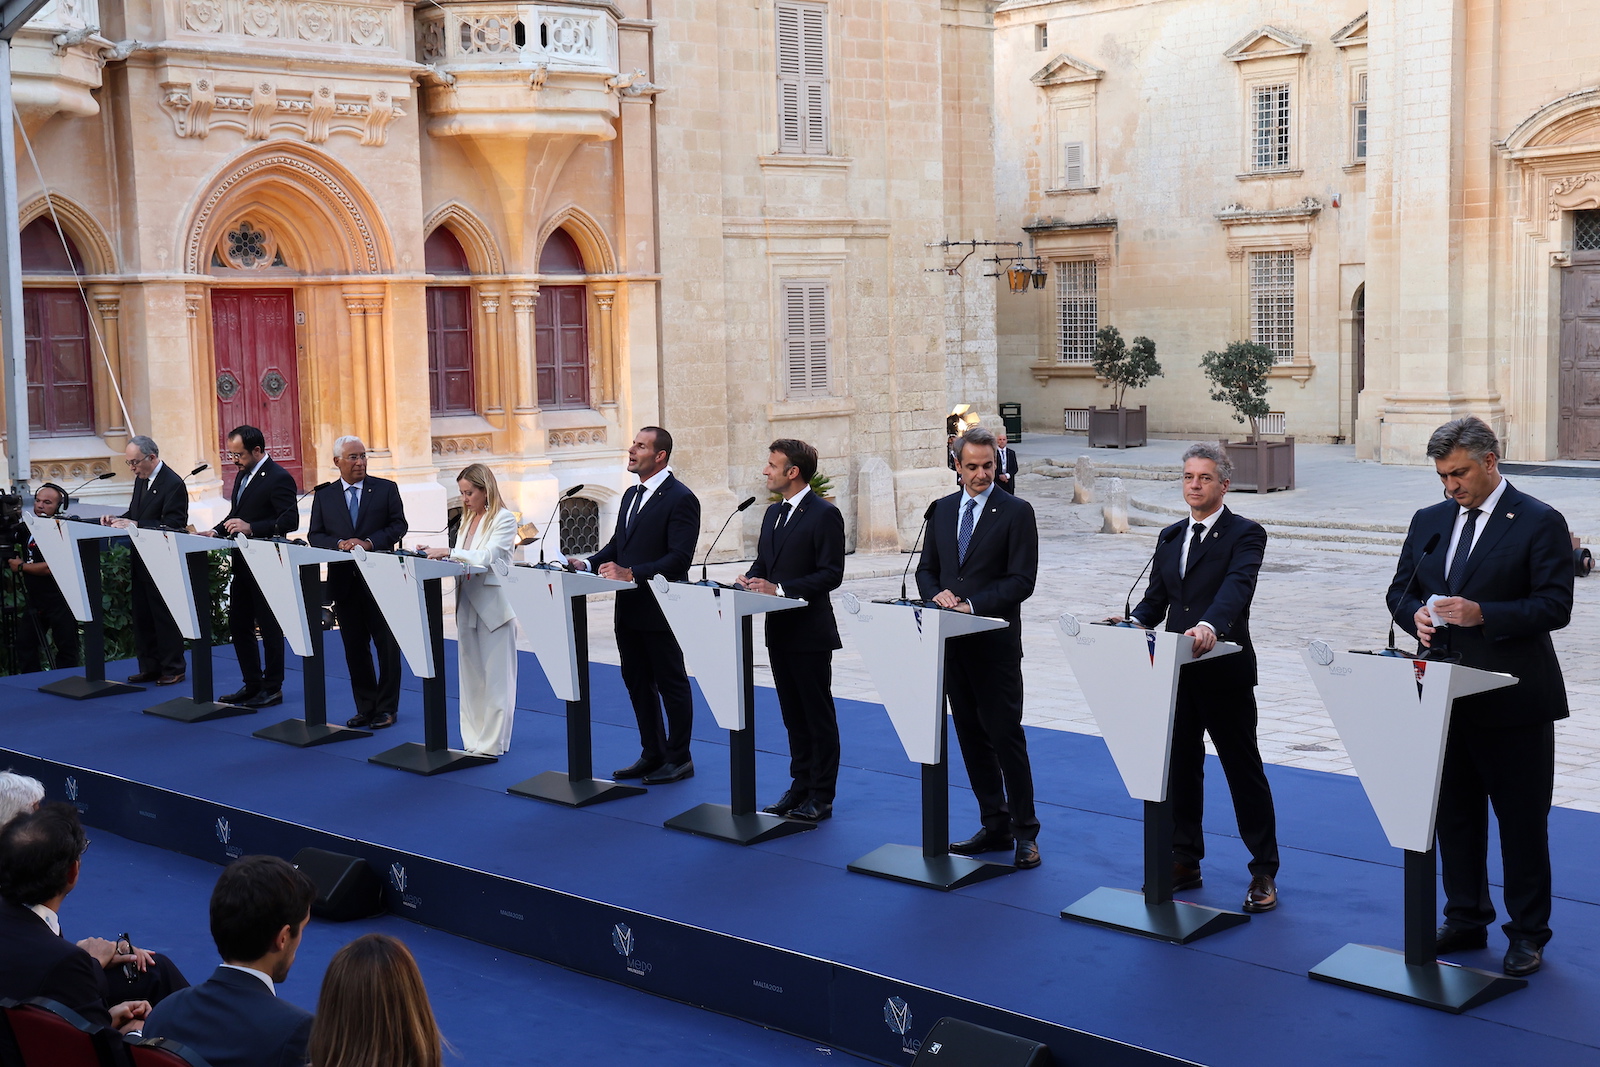 epa10890569 (L-R) Spainâ€™s State Secretary for the EU, Pascual Ignacio Navarro Rios, Cyprus' President Nikos Christodoulides, Portuguese Prime Minister Antonio Costa, Italian Prime Minister Giorgia Meloni, Maltaâ€™s Prime Minister Robert Abela, French President Emmanuel Macron, Greek Prime Minister Kyriakos Mitsotakis, Slovenia's Prime Minister Robert Golob and Croatia's Prime Minister Andrej Plenkovic, take part in a press conference at  the 10th Summit of the Leaders of the Southern Countries of the European Union, in Valletta, Malta, 29 September 2023. The EU-Med9 meeting brings together the leaders or representatives of Spain, Portugal, France, Italy, Greece, Malta, Cyprus, Slovenia and Croatia.  EPA/Domenic Aquilina